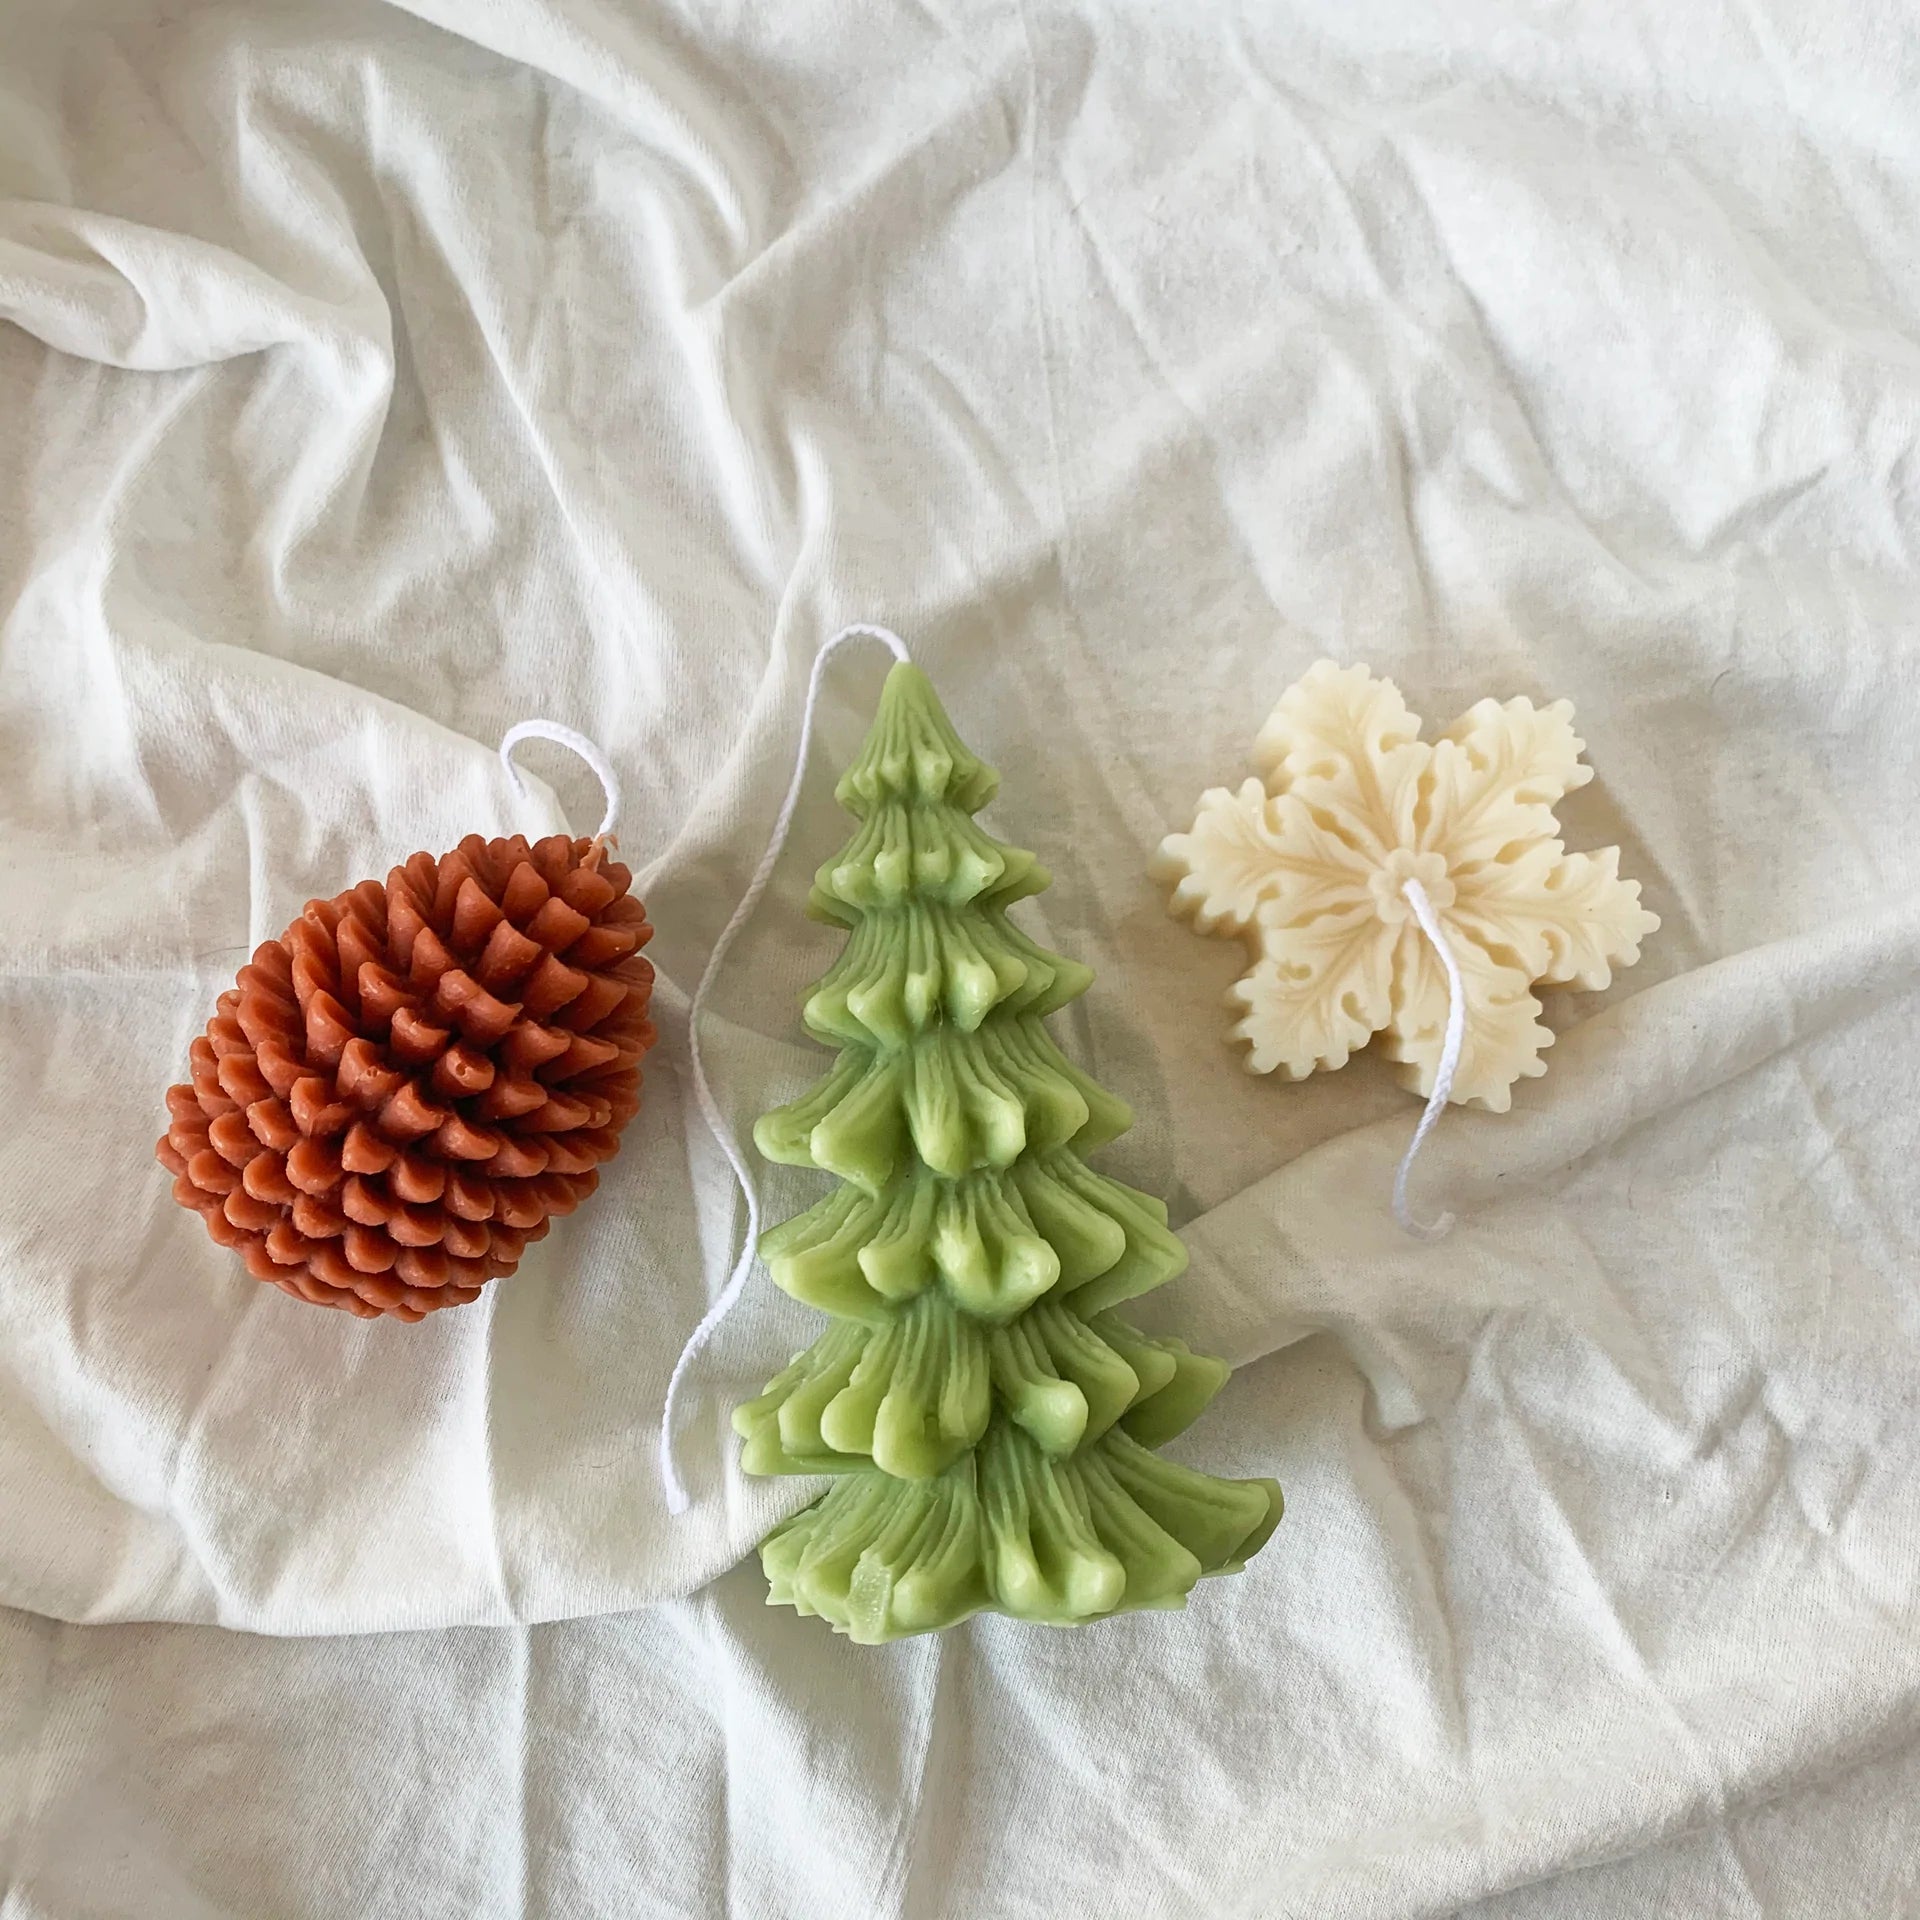 Yui Brooklyn Candle Set of 3 Holiday Shaped soy & Beeswax